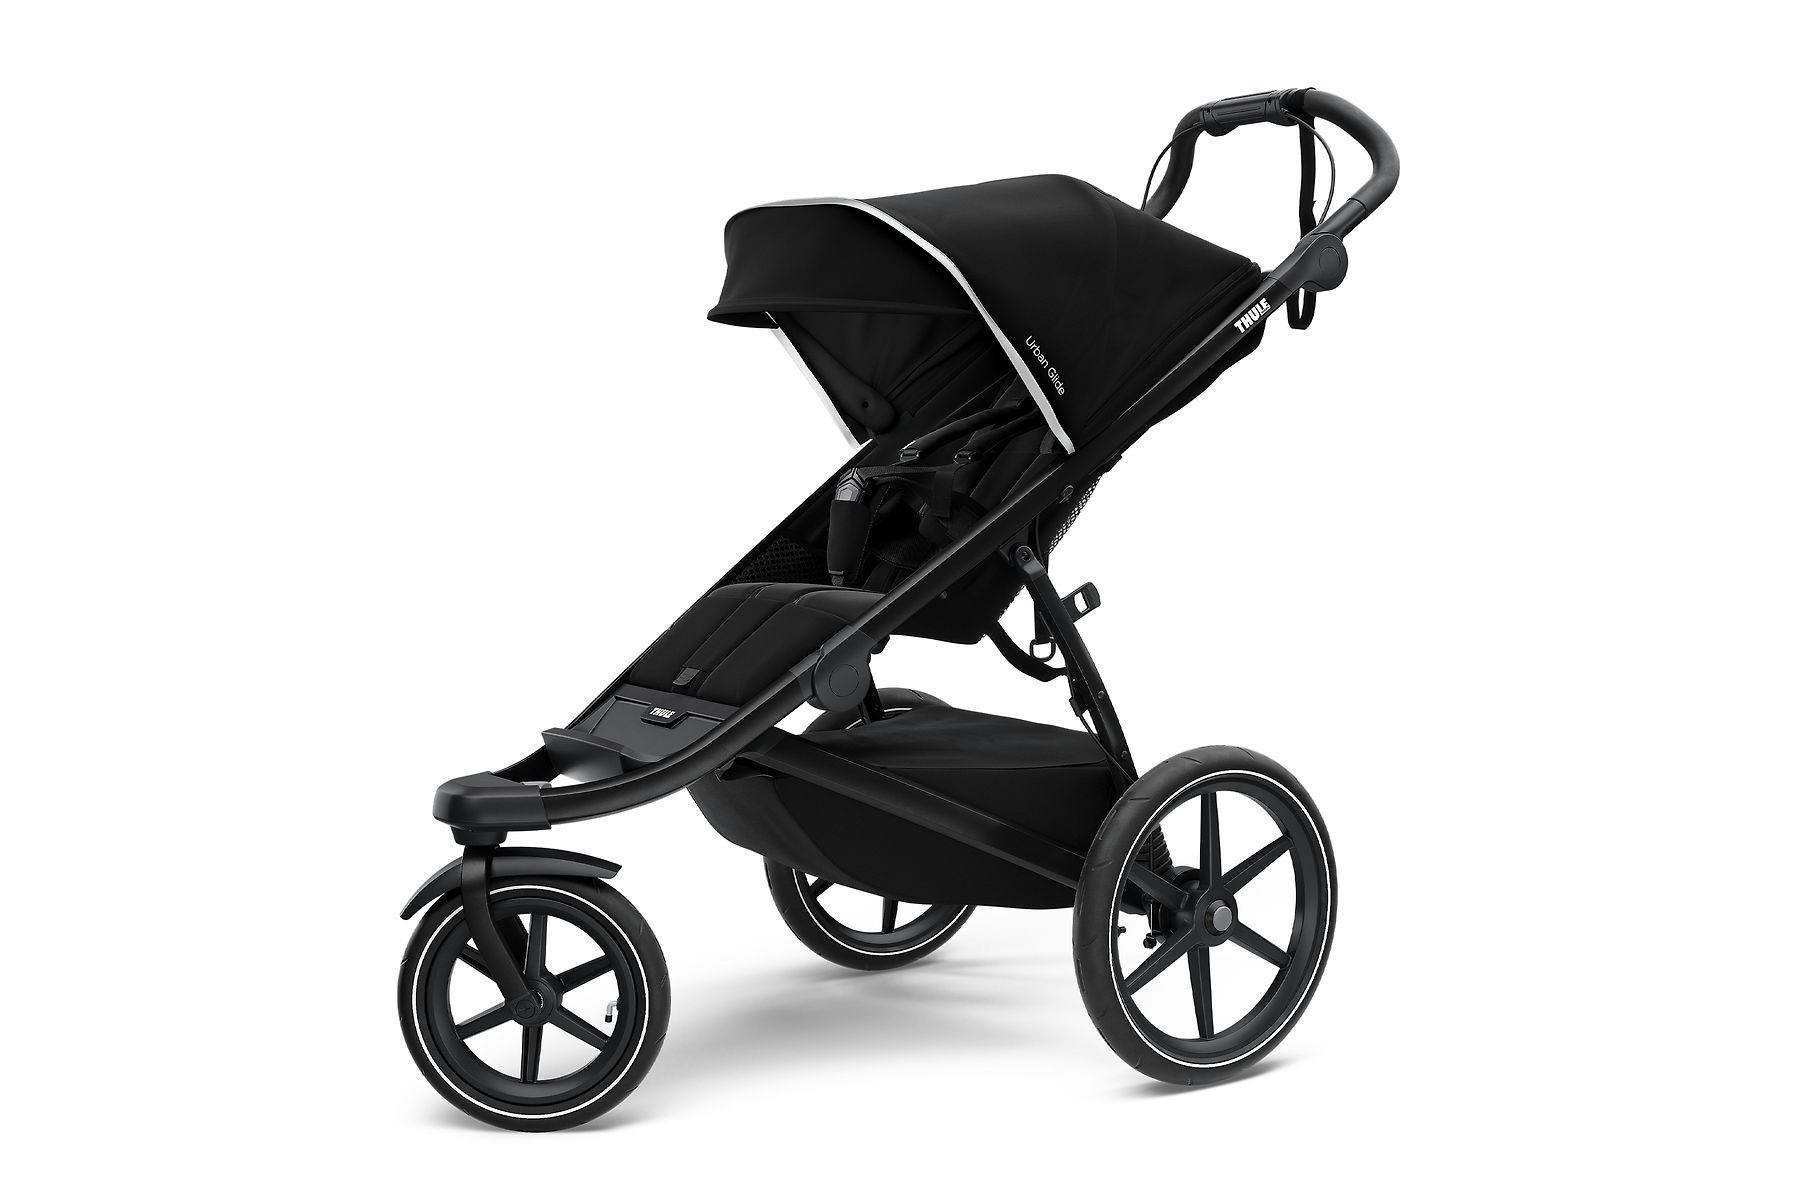 Product image of Thule Urban Glide 2 Stroller